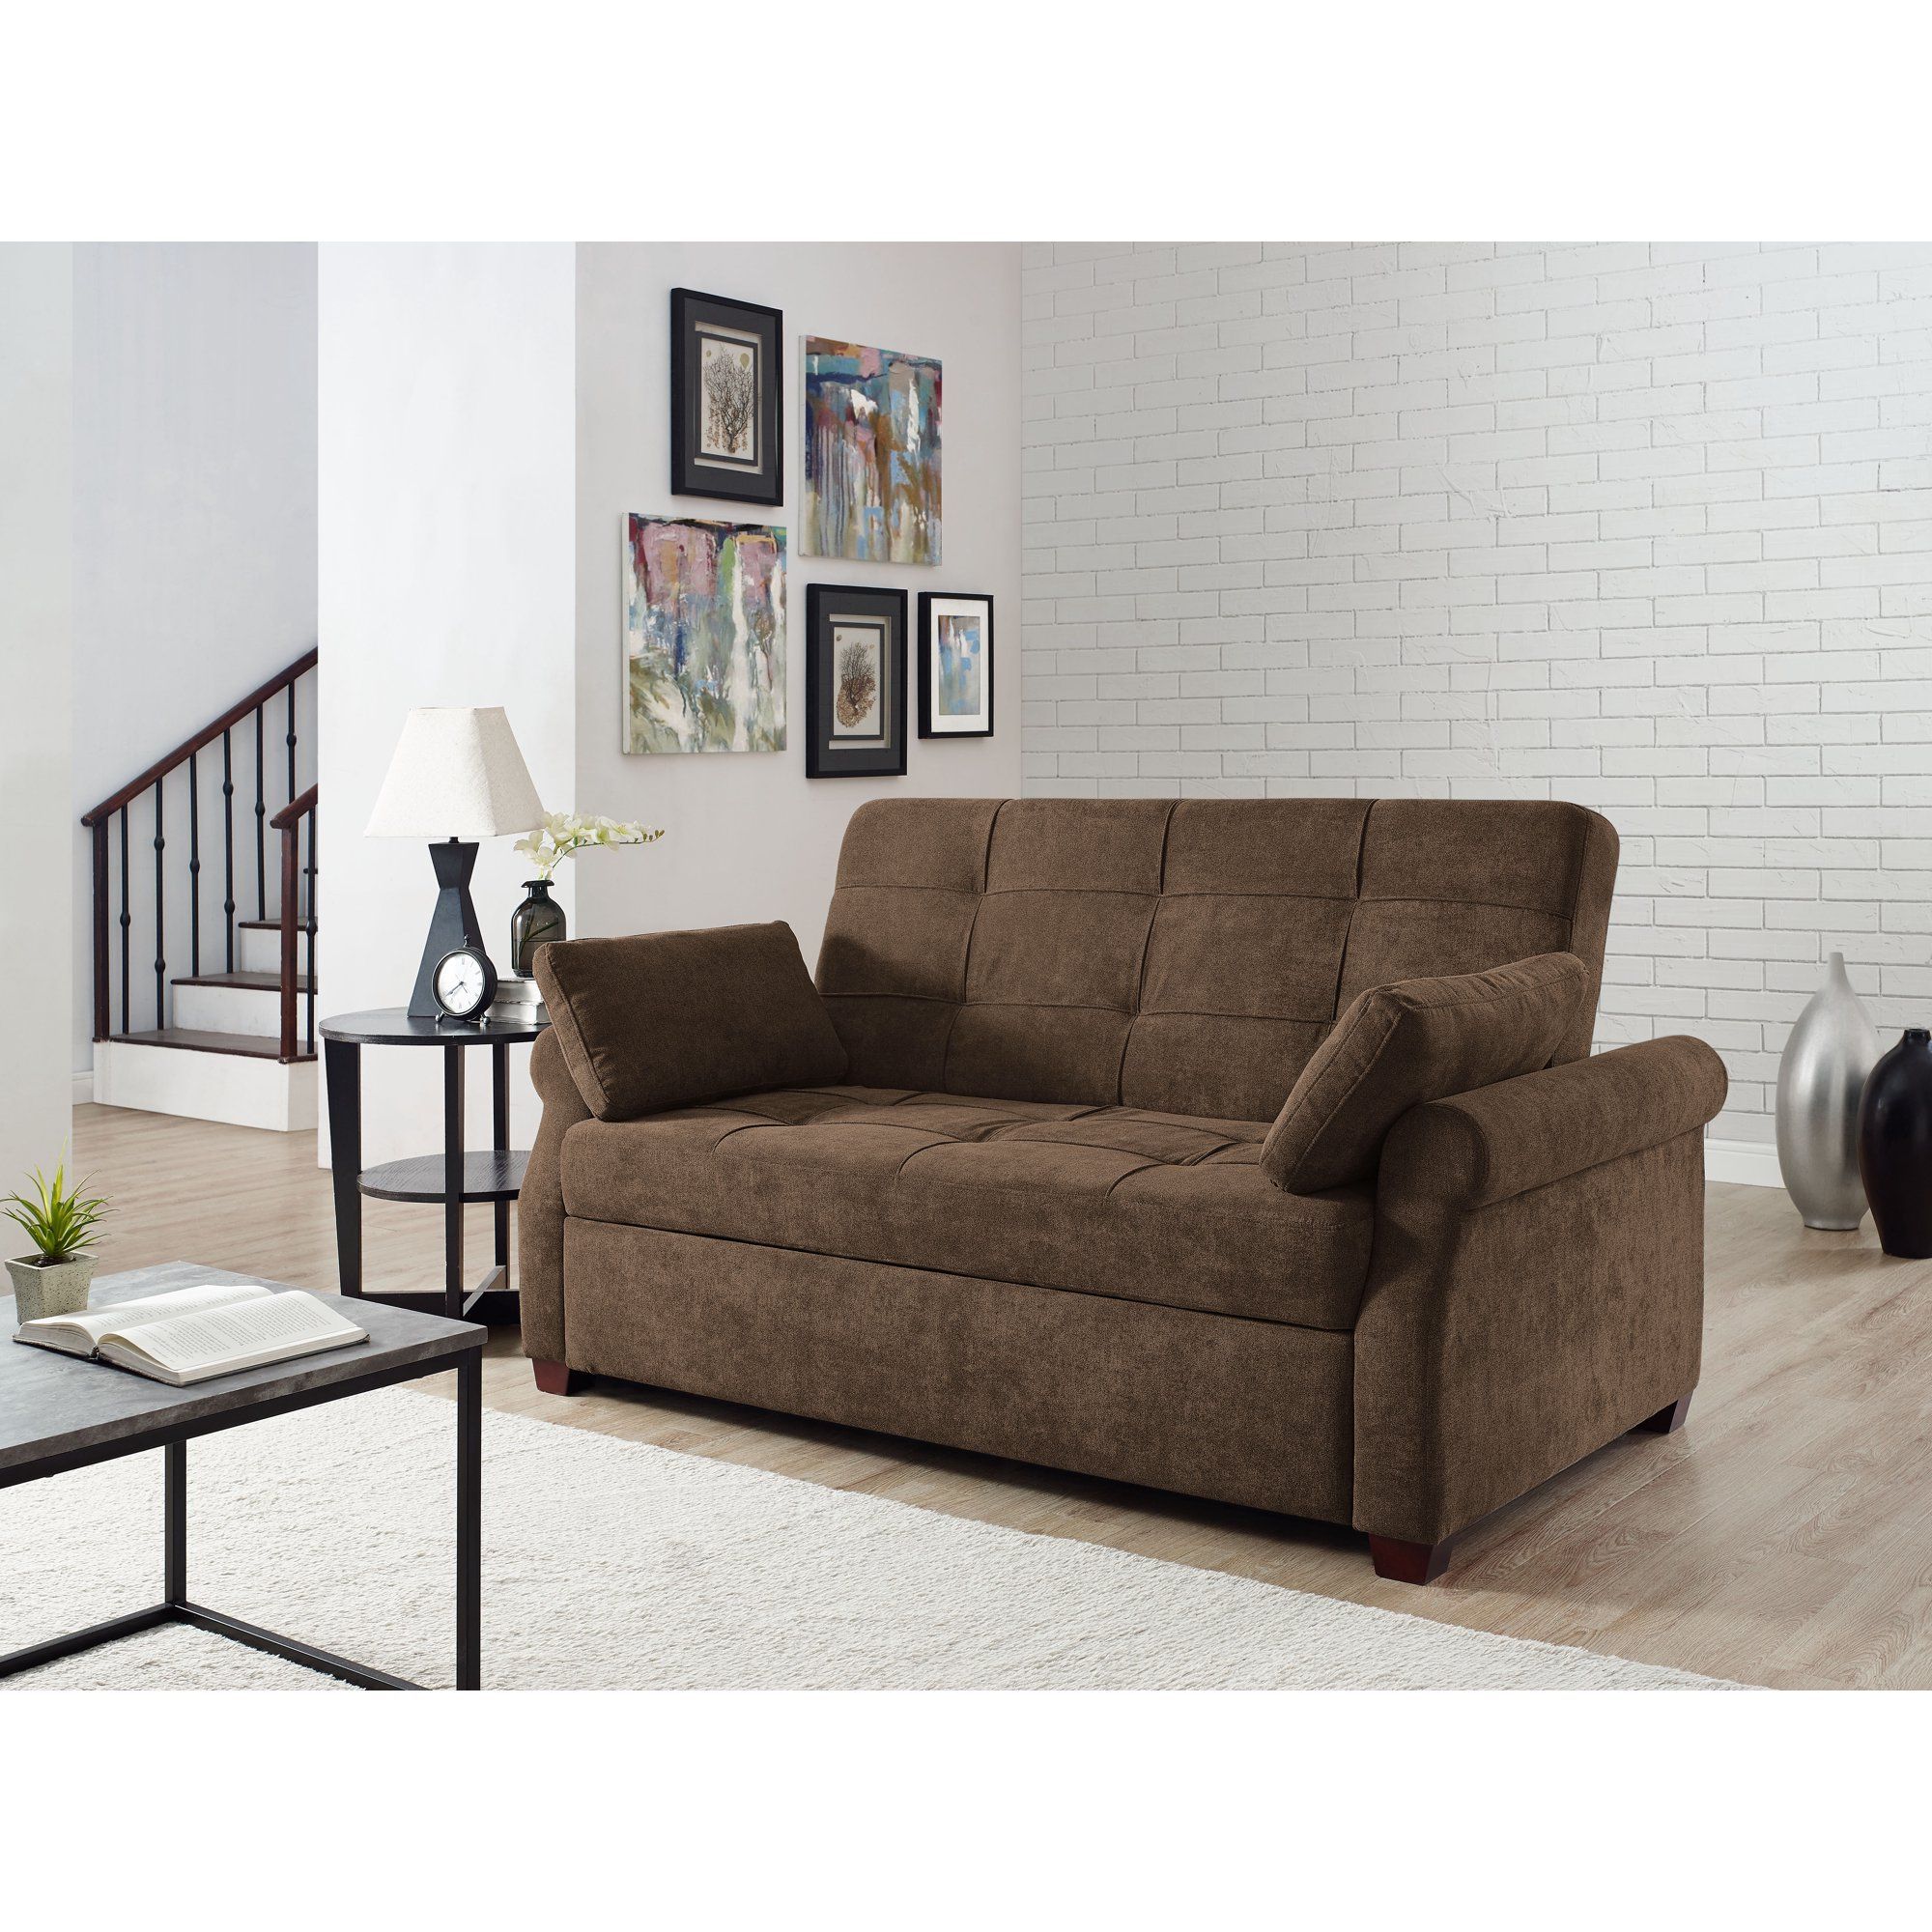 Serta Haiden Queen Convertible Sofa, Bed And Loungerlifestyle In Queen Size Convertible Sofa Beds (View 13 of 20)